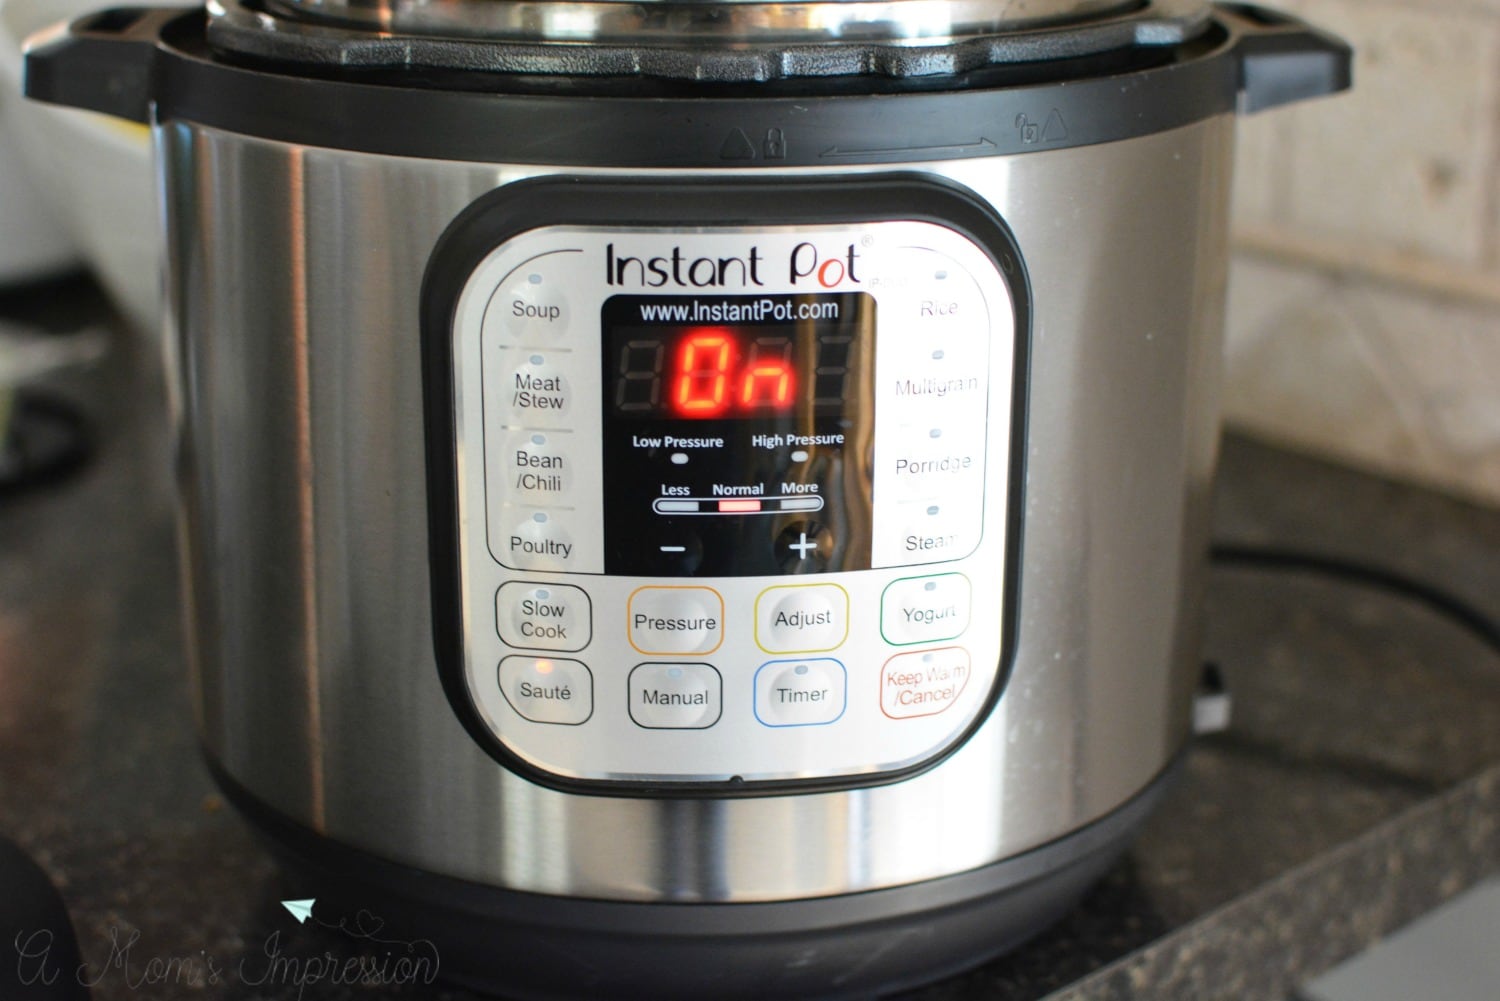 This Instant Pot size is 6 quarts and it works great for me and my family!